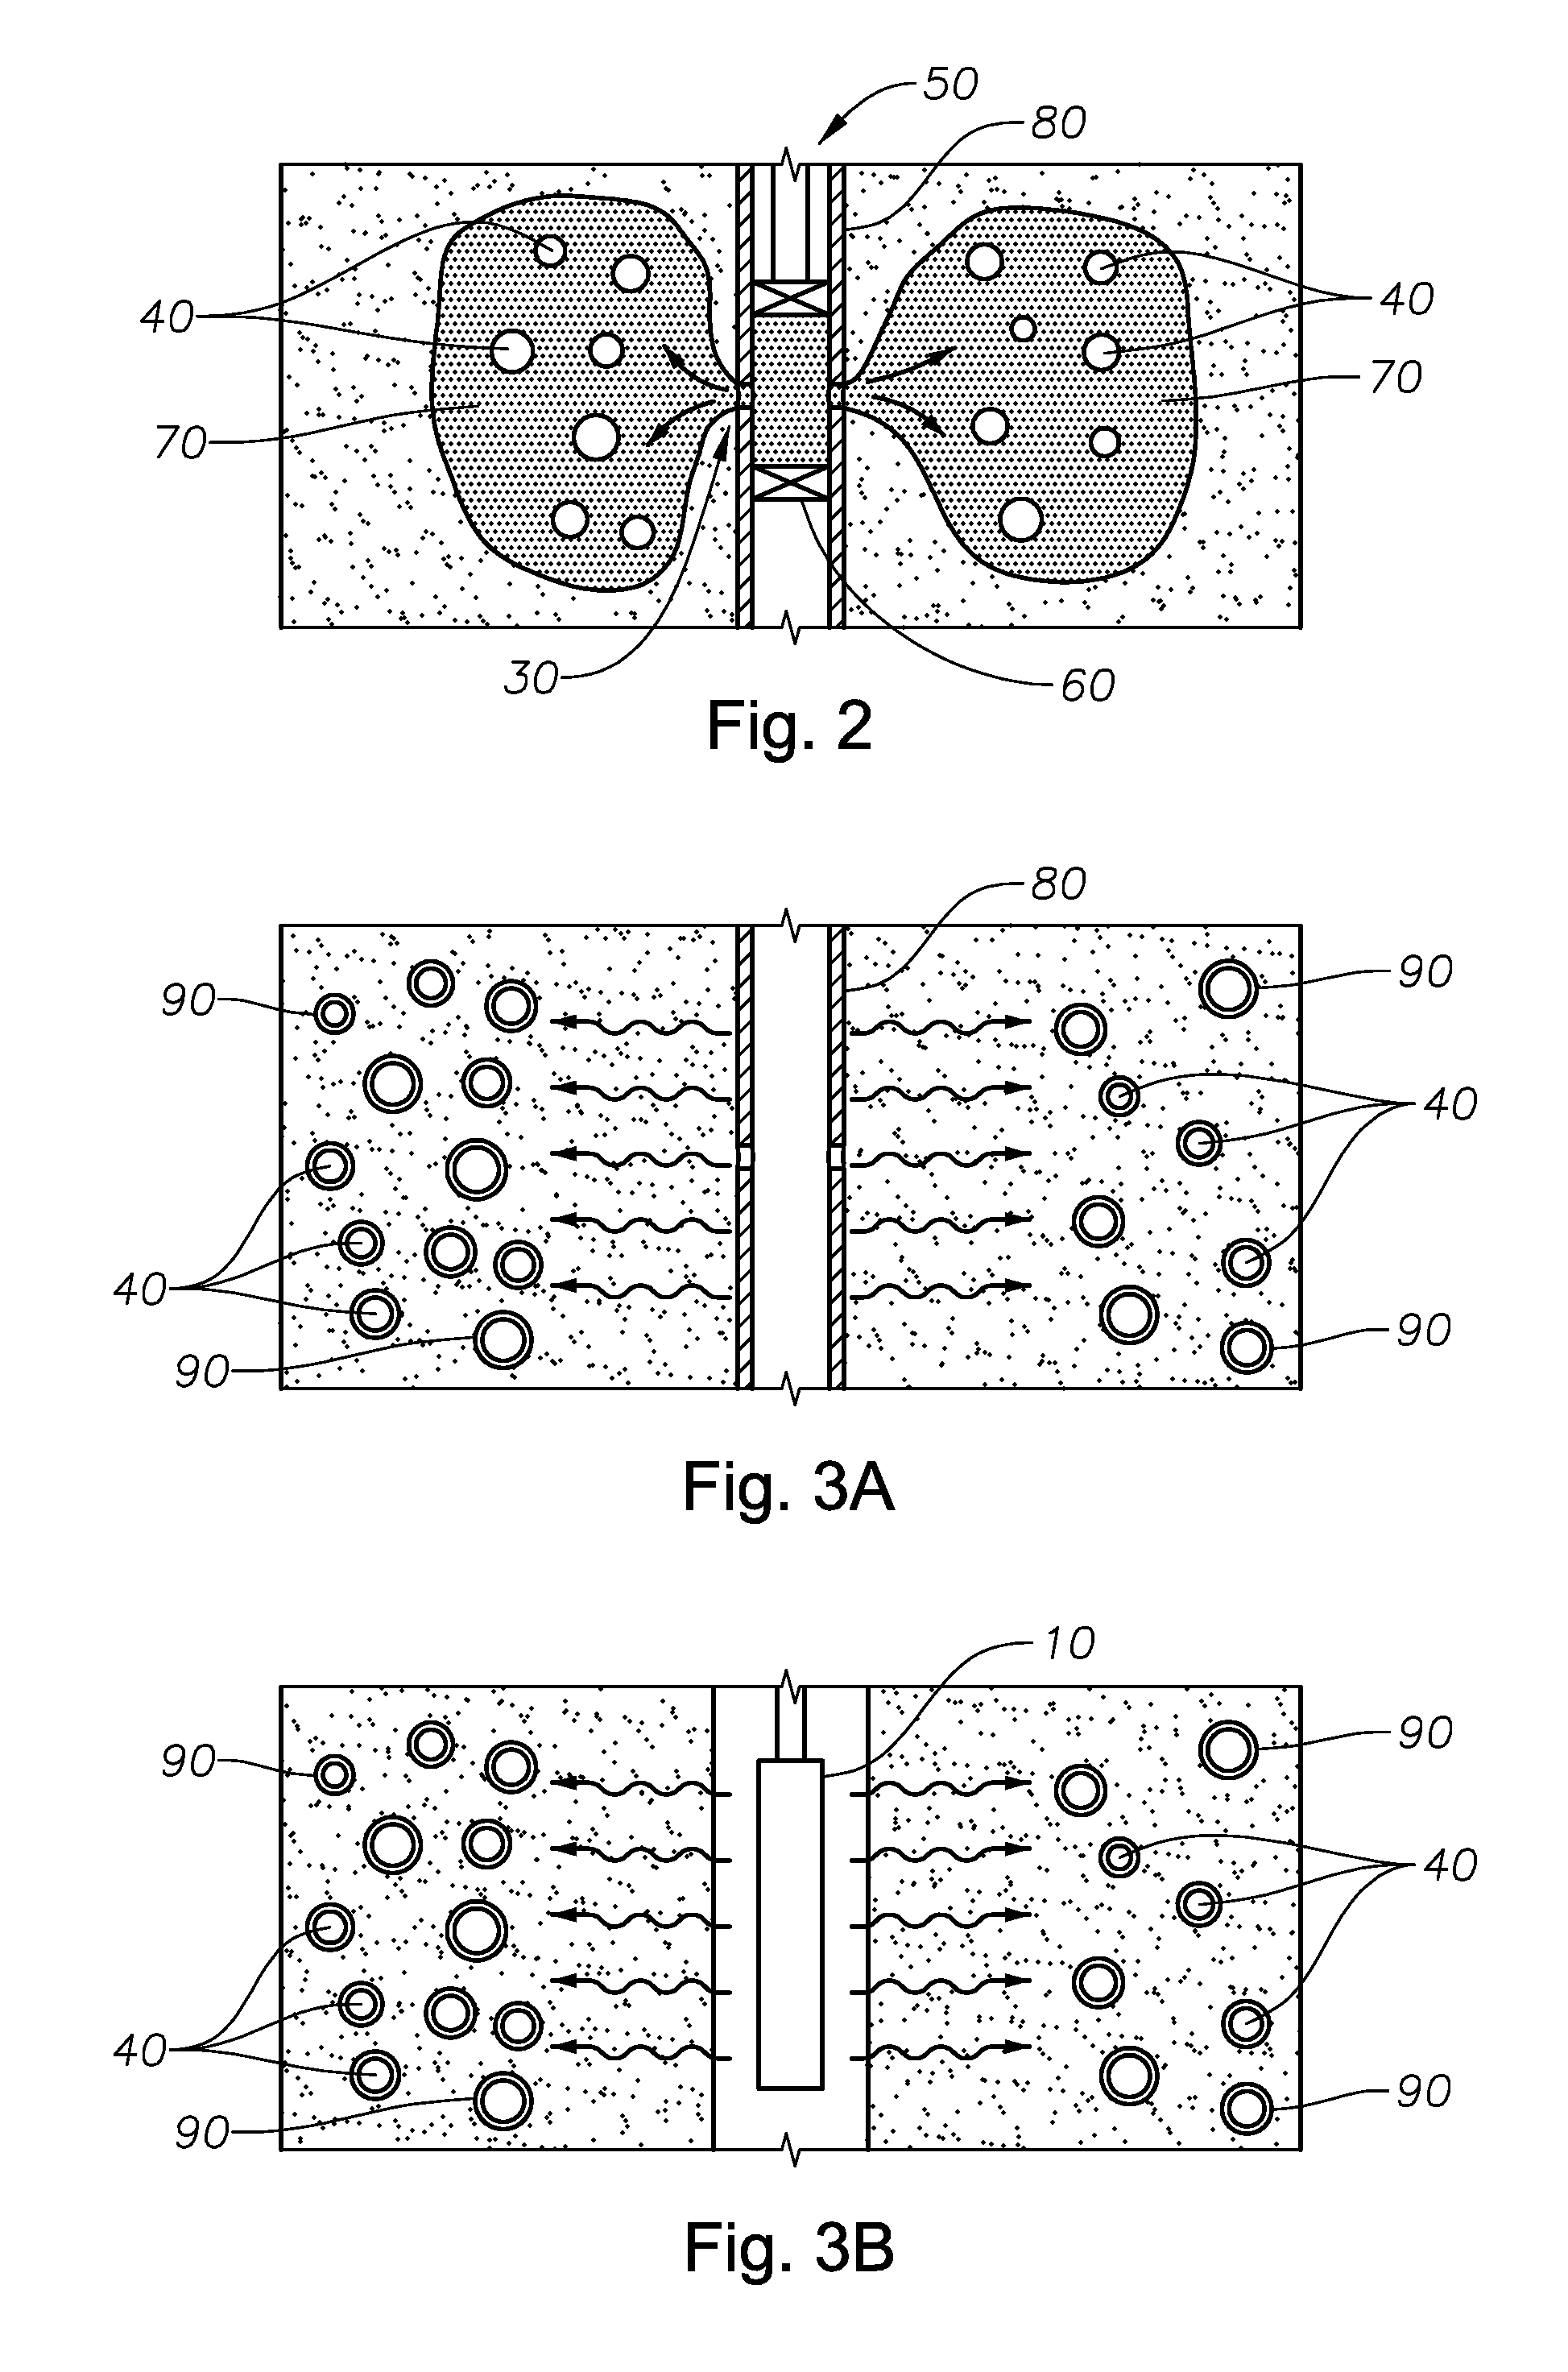 Sand production control through the use of magnetic forces